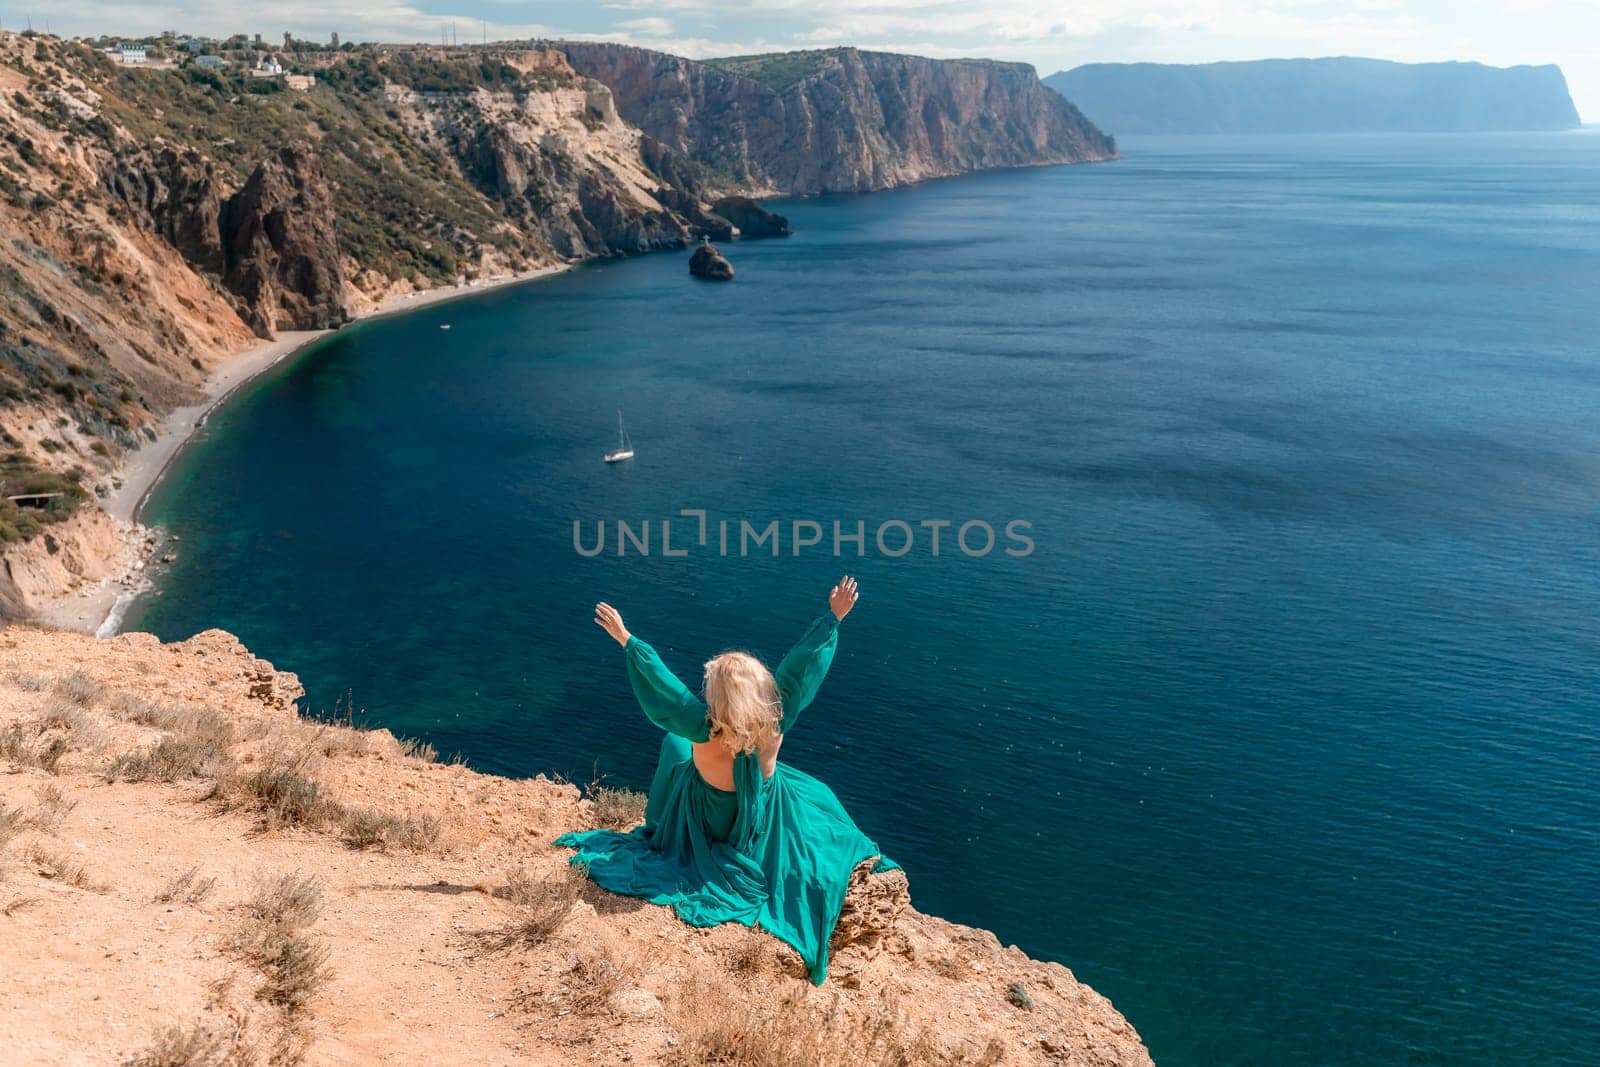 Woman sea. A happy girl is sitting with her back to the viewer in a mint dress on top of a mountain against the background of the ocean and rocks in the sea. by Matiunina